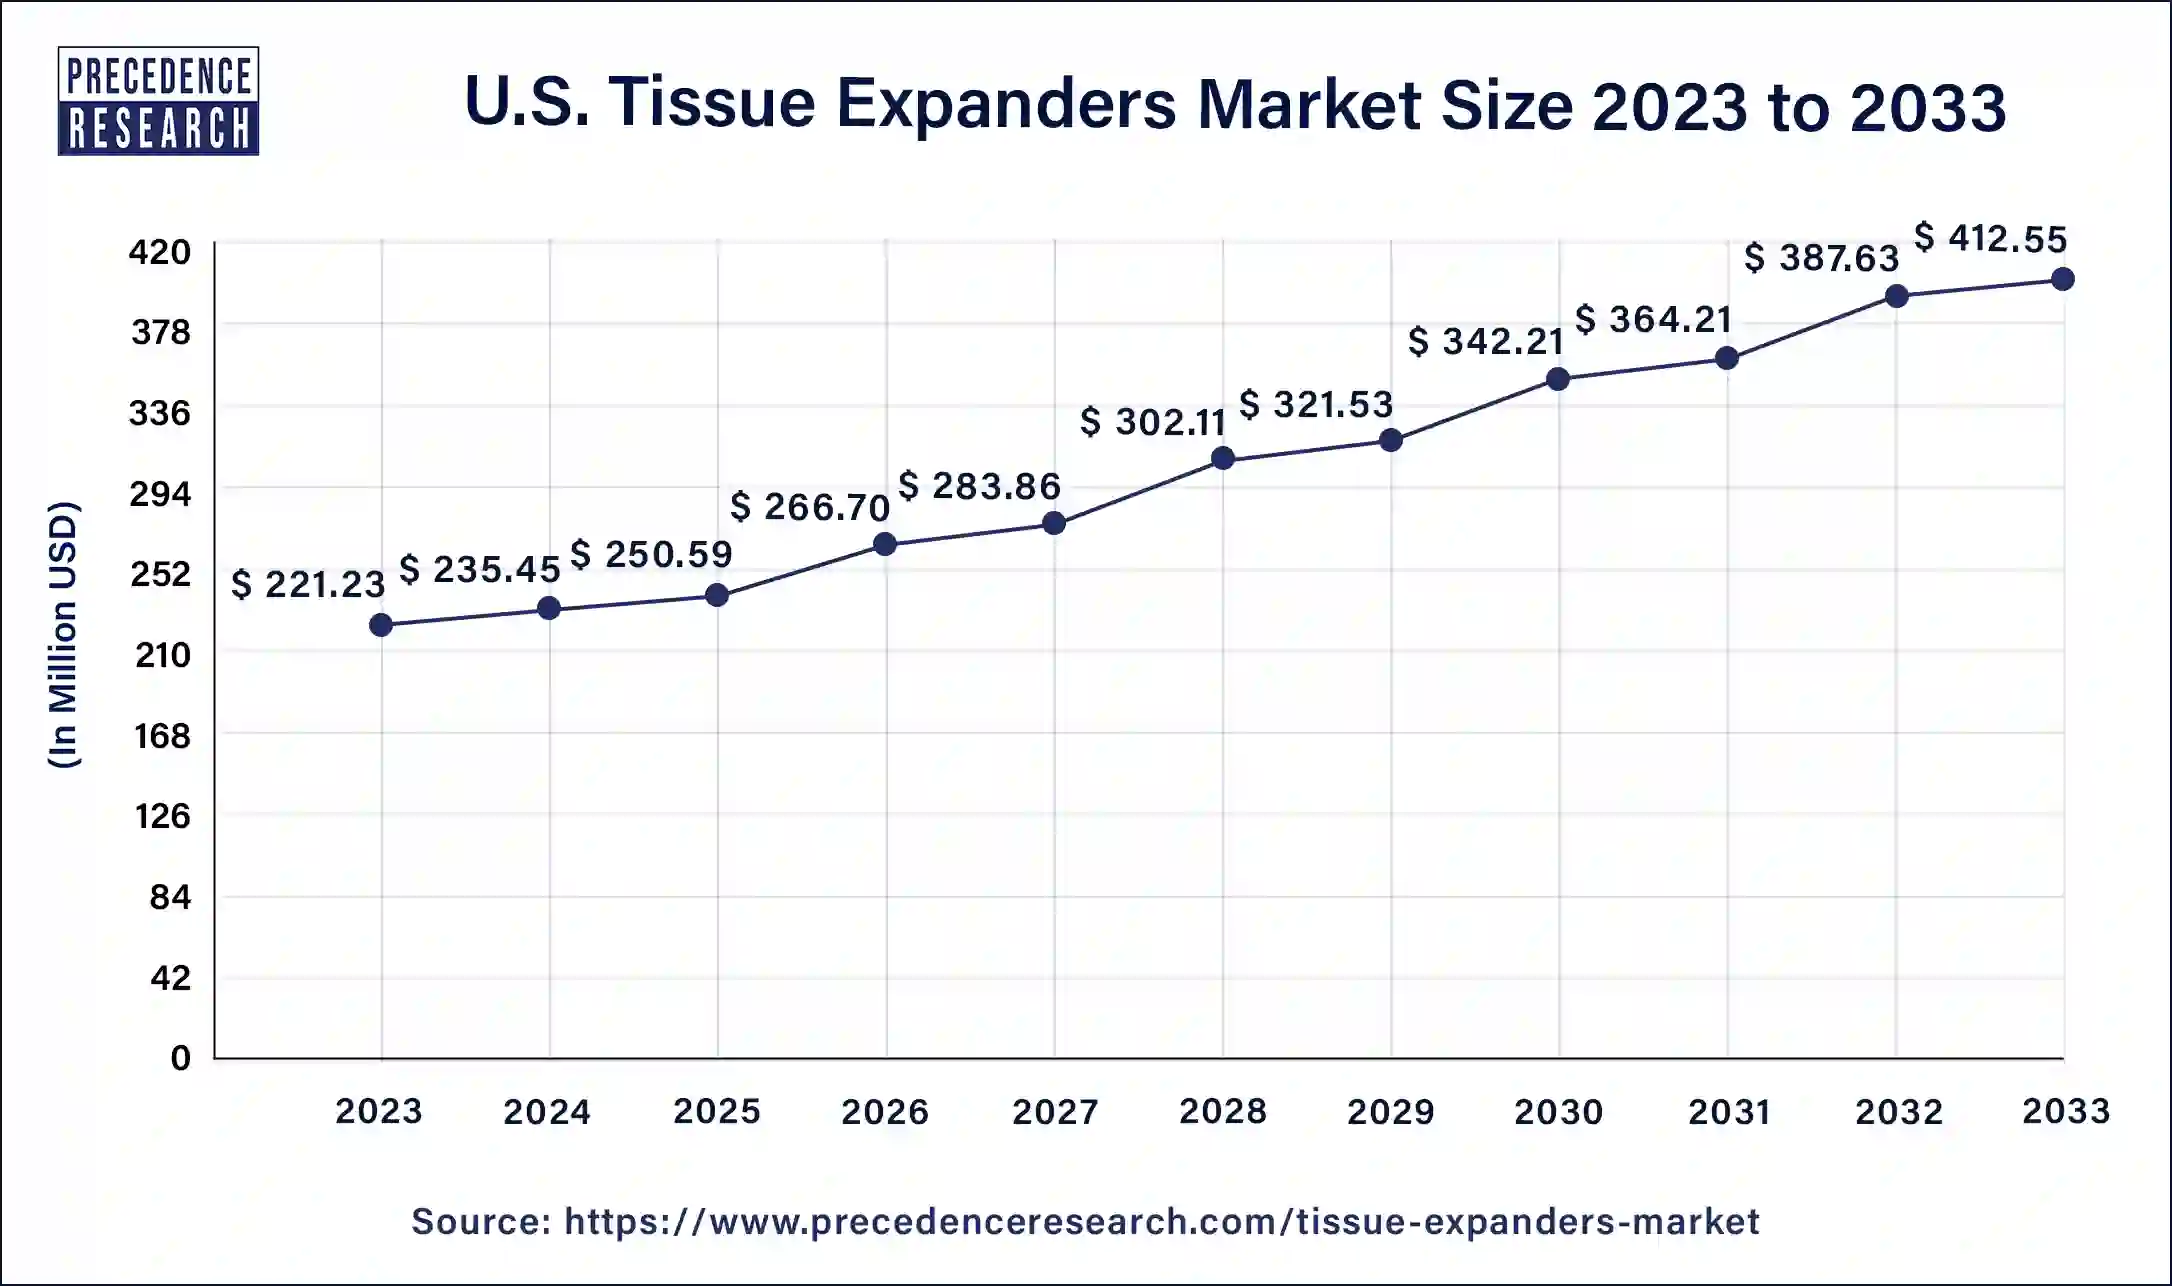 U.S. Tissue Expanders Market Size 2024 to 2033